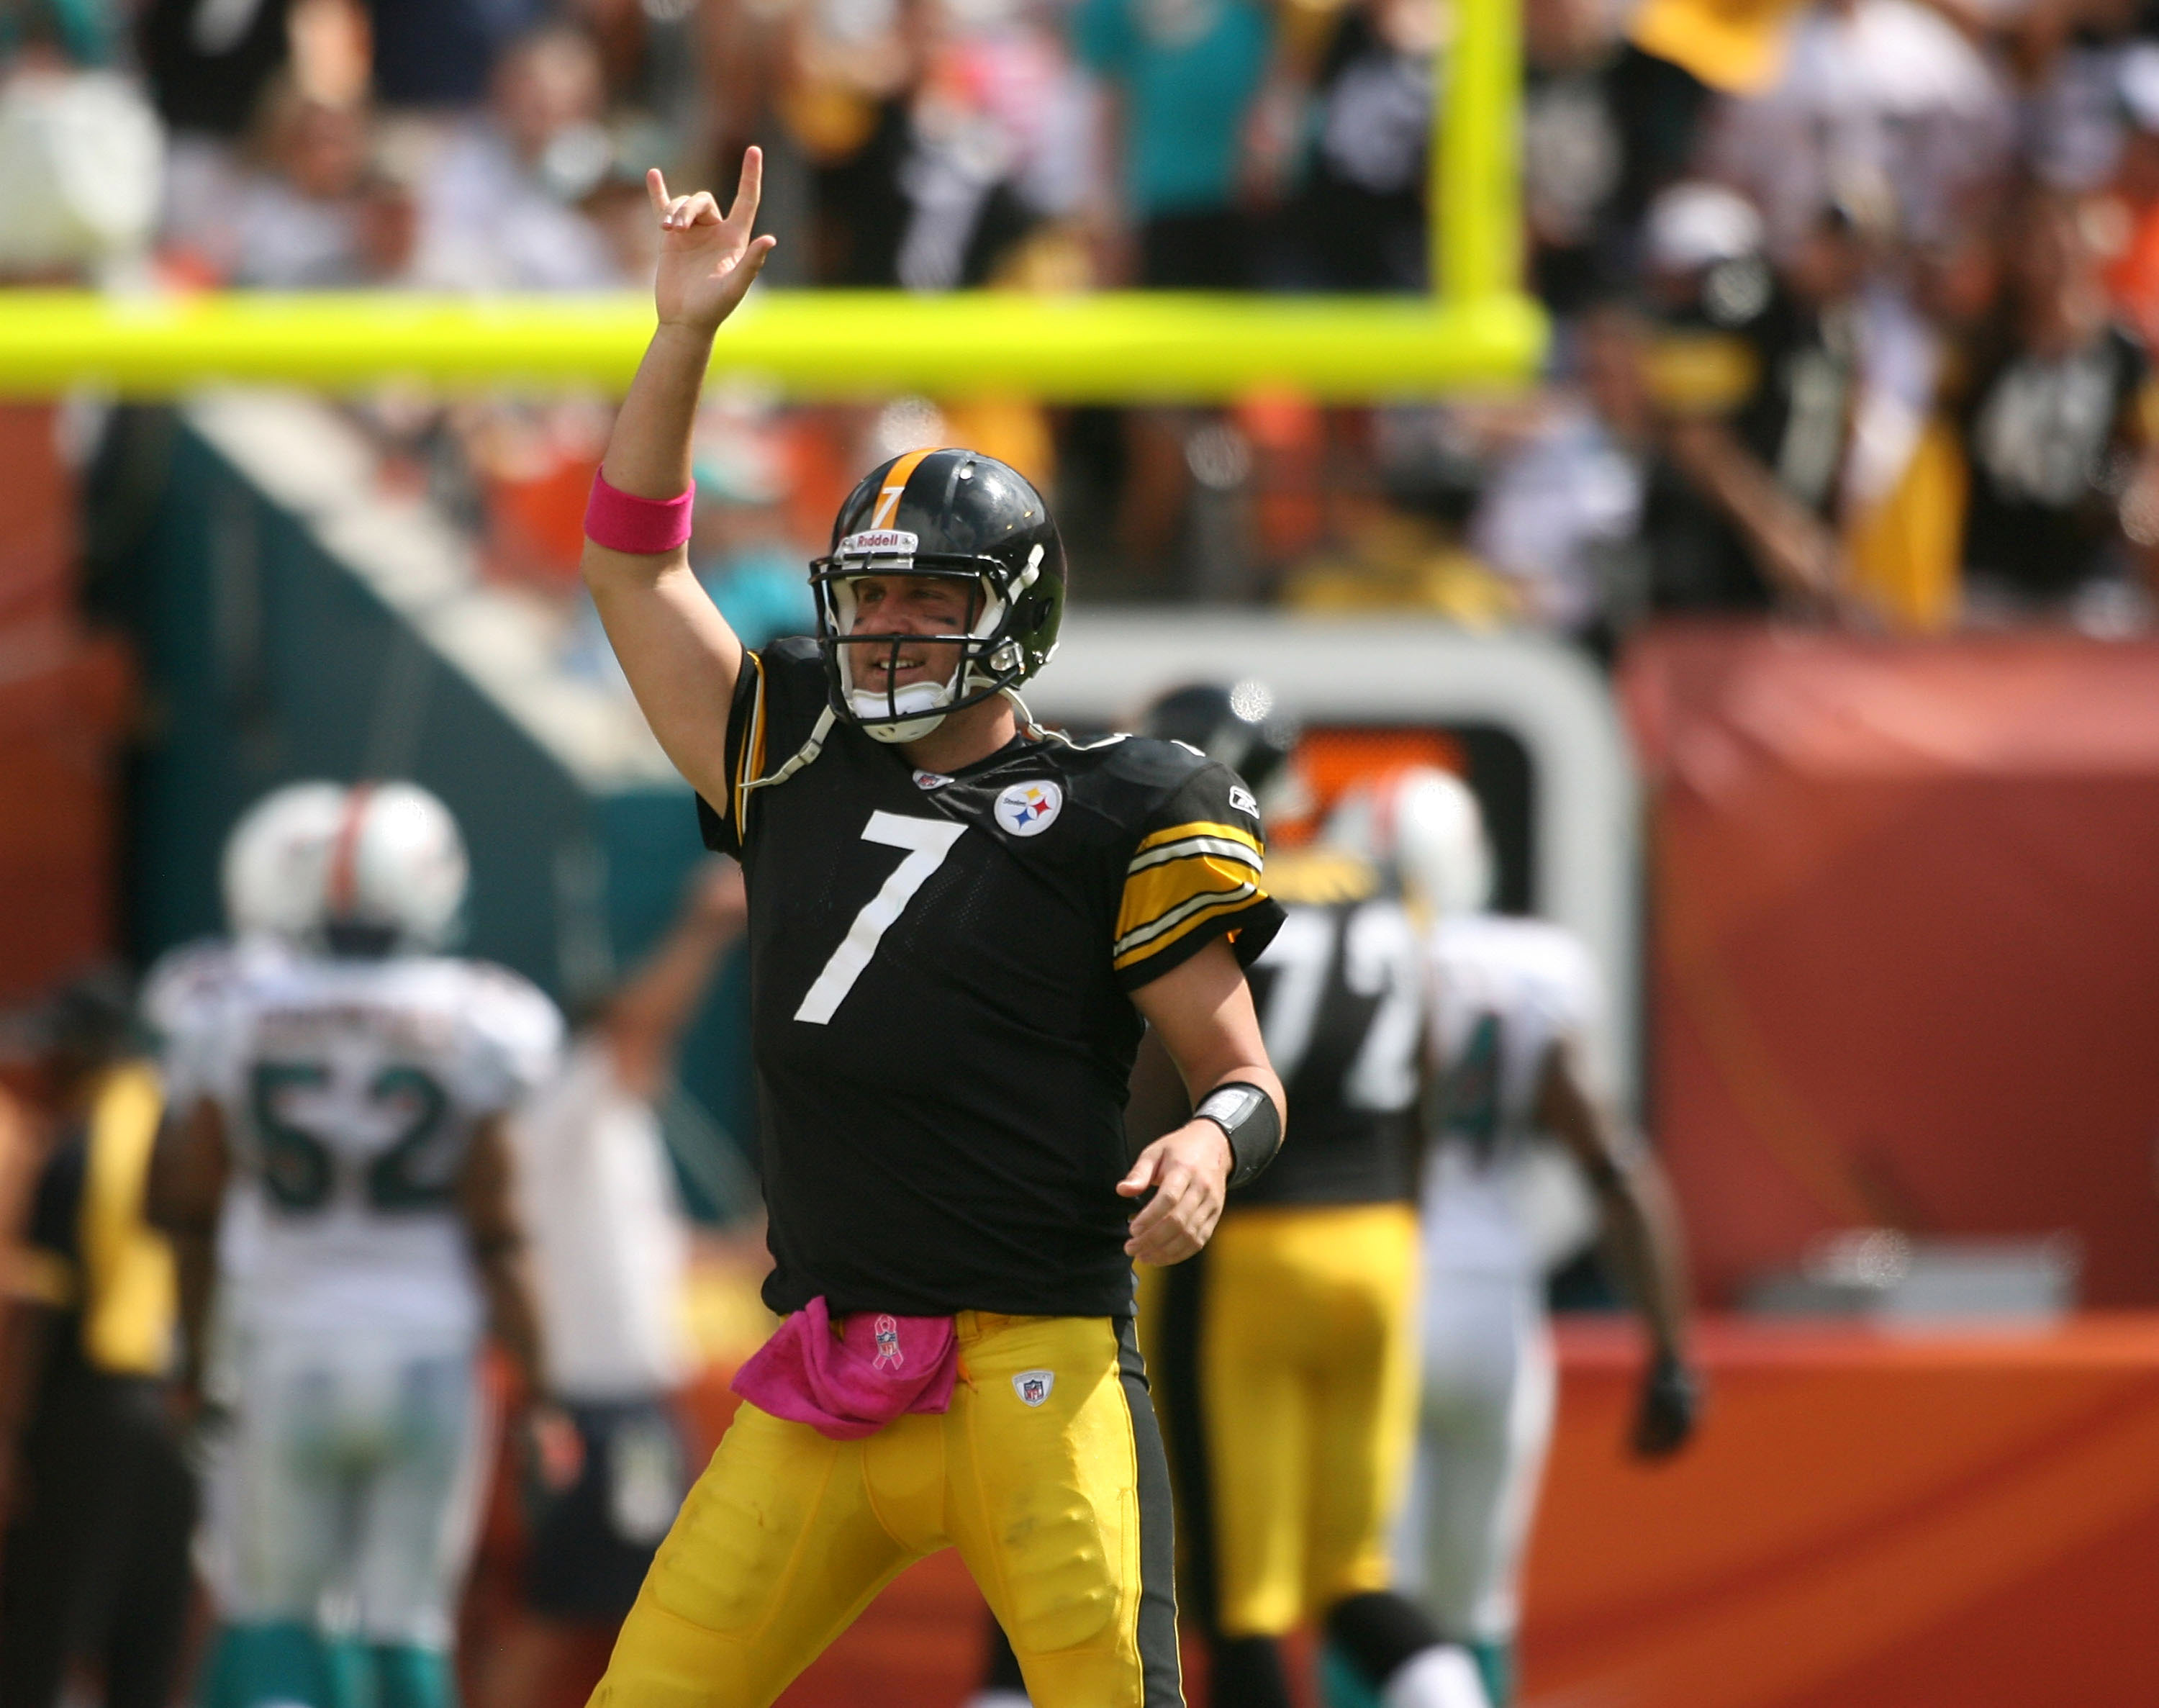 MIAMI - OCTOBER 24:  Quarterback Ben Roethlisberger #7 celebrates a touchdown against the Miami Dolphins at Sun Life Stadium on October 24, 2010 in Miami, Florida.  (Photo by Marc Serota/Getty Images)